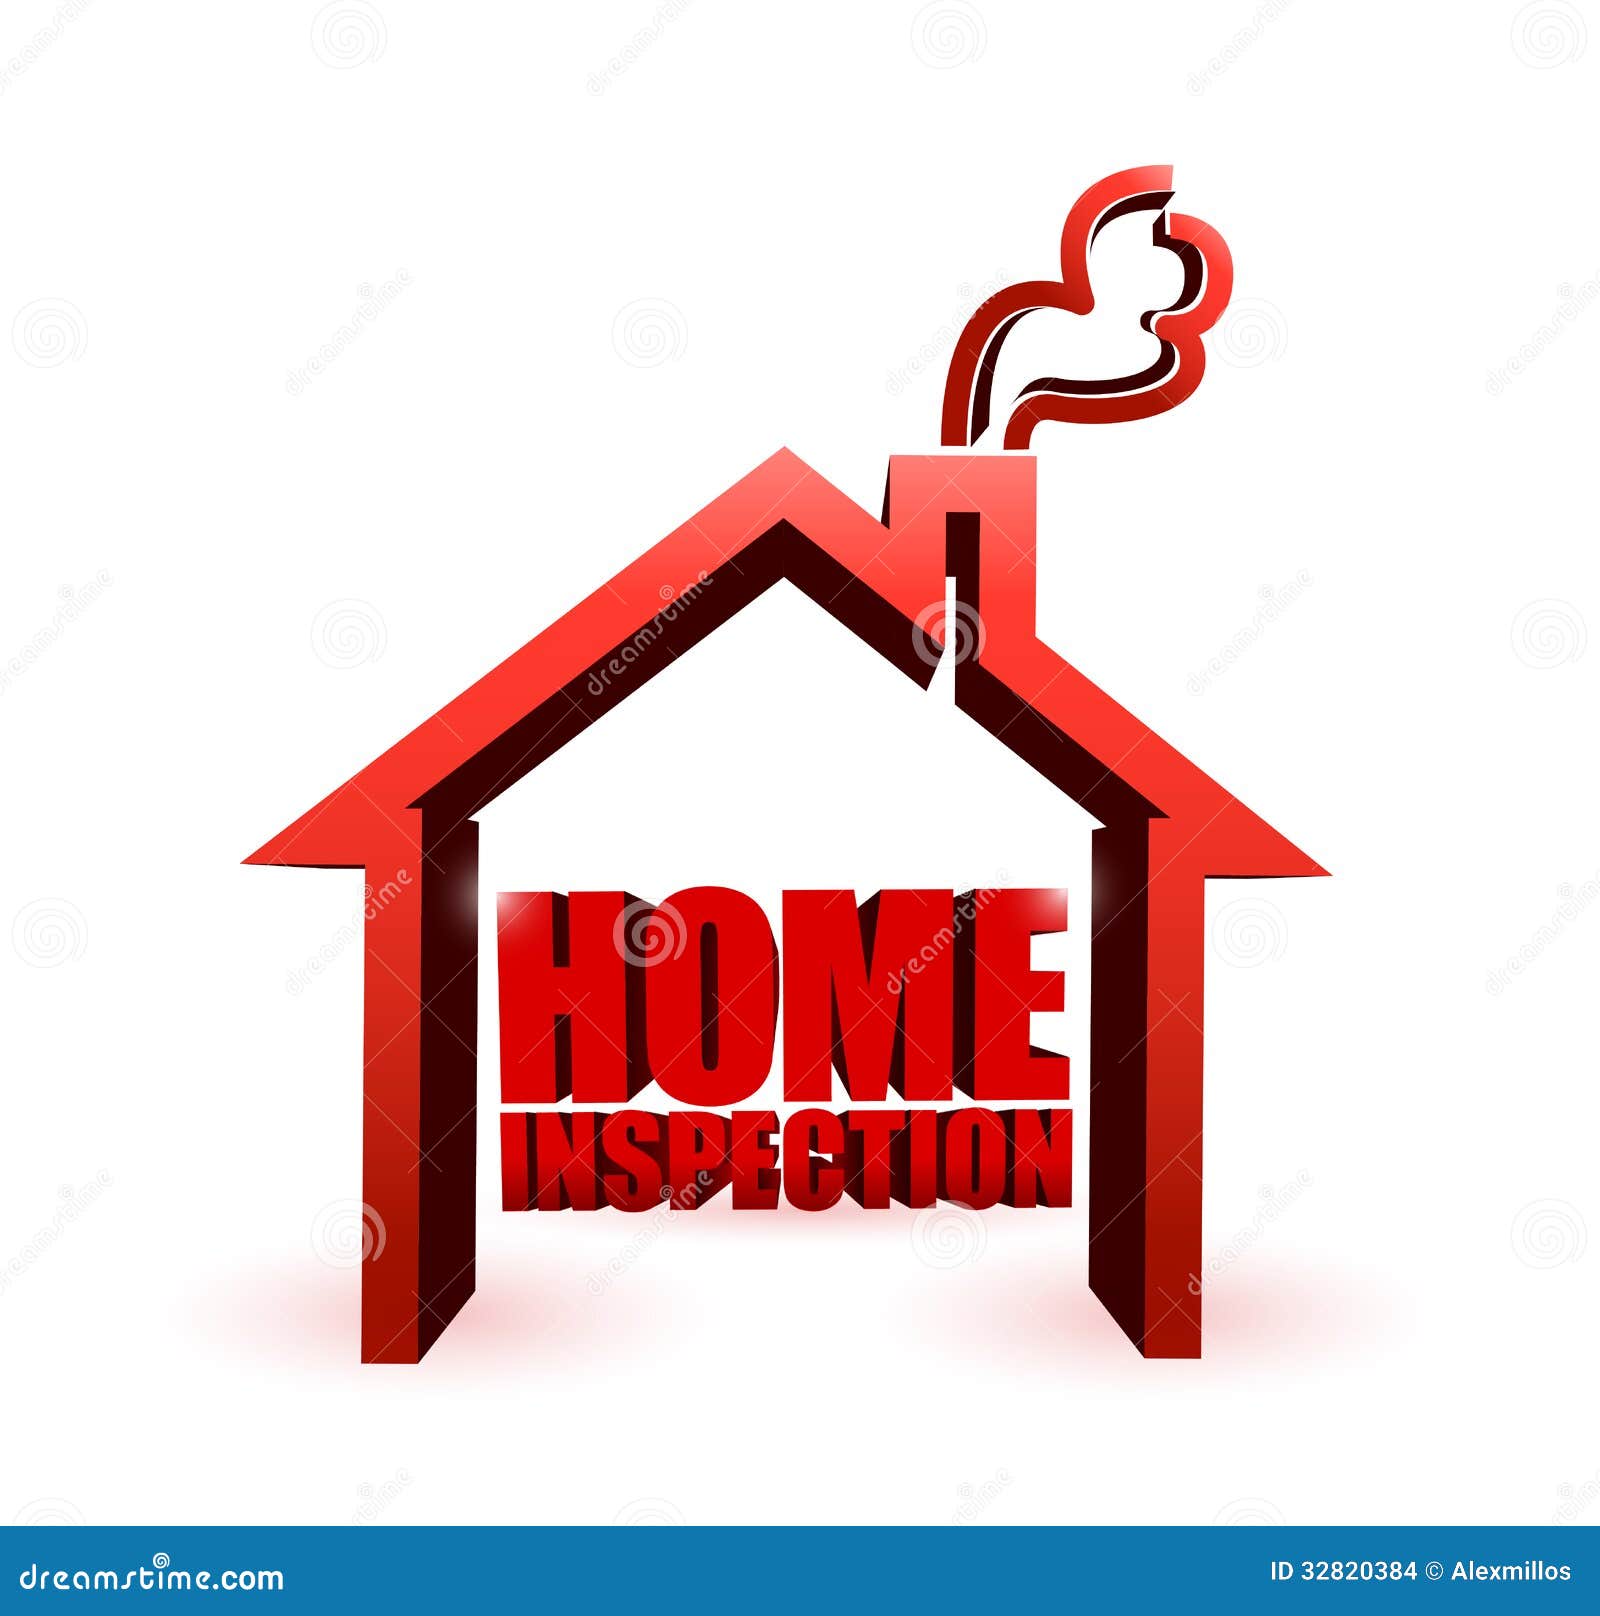 home inspector clipart free - photo #37